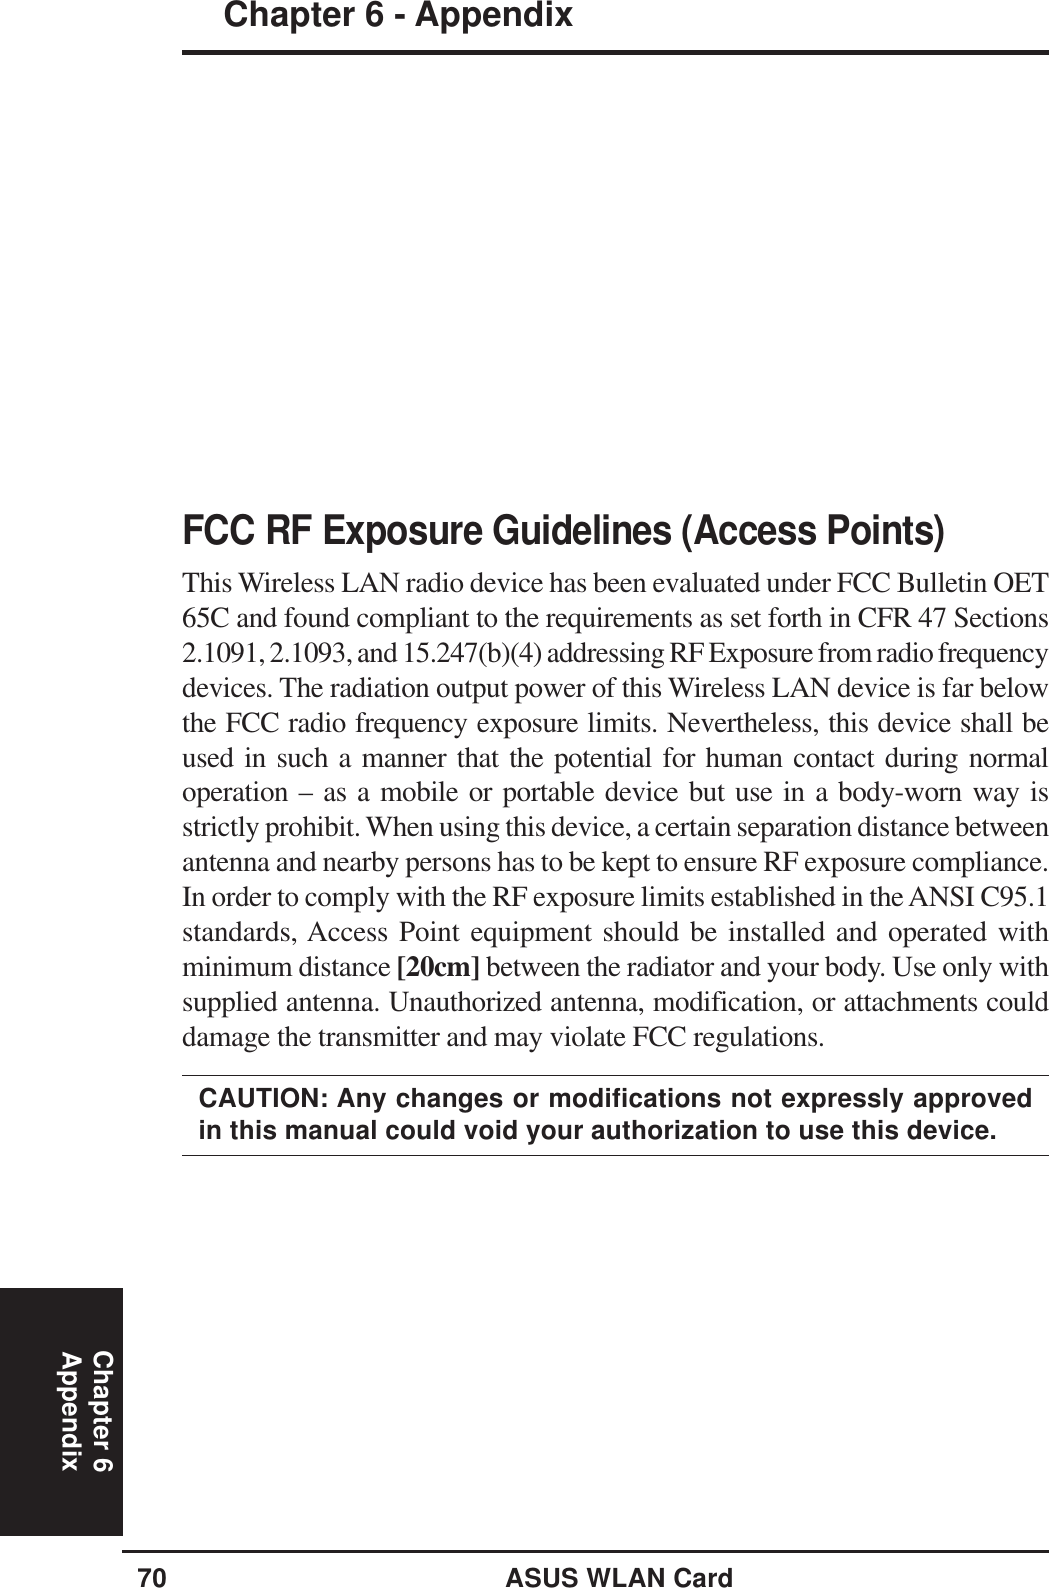 70 ASUS WLAN CardChapter 6 - AppendixChapter 6AppendixFCC RF Exposure Guidelines (Access Points)This Wireless LAN radio device has been evaluated under FCC Bulletin OET65C and found compliant to the requirements as set forth in CFR 47 Sections2.1091, 2.1093, and 15.247(b)(4) addressing RF Exposure from radio frequencydevices. The radiation output power of this Wireless LAN device is far belowthe FCC radio frequency exposure limits. Nevertheless, this device shall beused in such a manner that the potential for human contact during normaloperation – as a mobile or portable device but use in a body-worn way isstrictly prohibit. When using this device, a certain separation distance betweenantenna and nearby persons has to be kept to ensure RF exposure compliance.In order to comply with the RF exposure limits established in the ANSI C95.1standards, Access Point equipment should be installed and operated withminimum distance [20cm] between the radiator and your body. Use only withsupplied antenna. Unauthorized antenna, modification, or attachments coulddamage the transmitter and may violate FCC regulations.CAUTION: Any changes or modifications not expressly approvedin this manual could void your authorization to use this device.